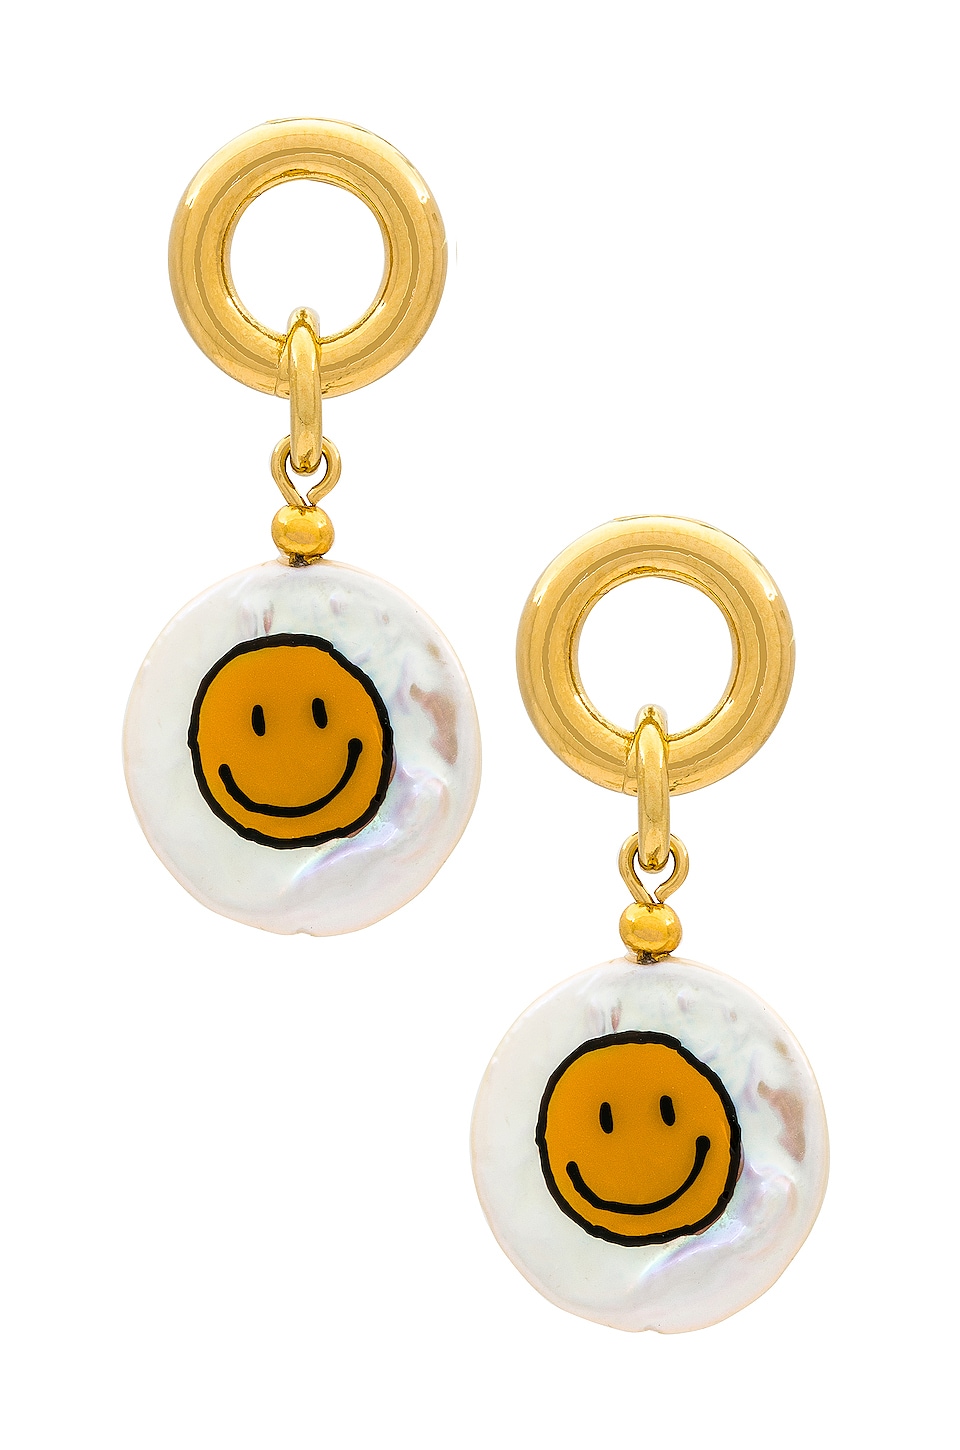 Image 1 of Mania Earrings in Yellow Smiley